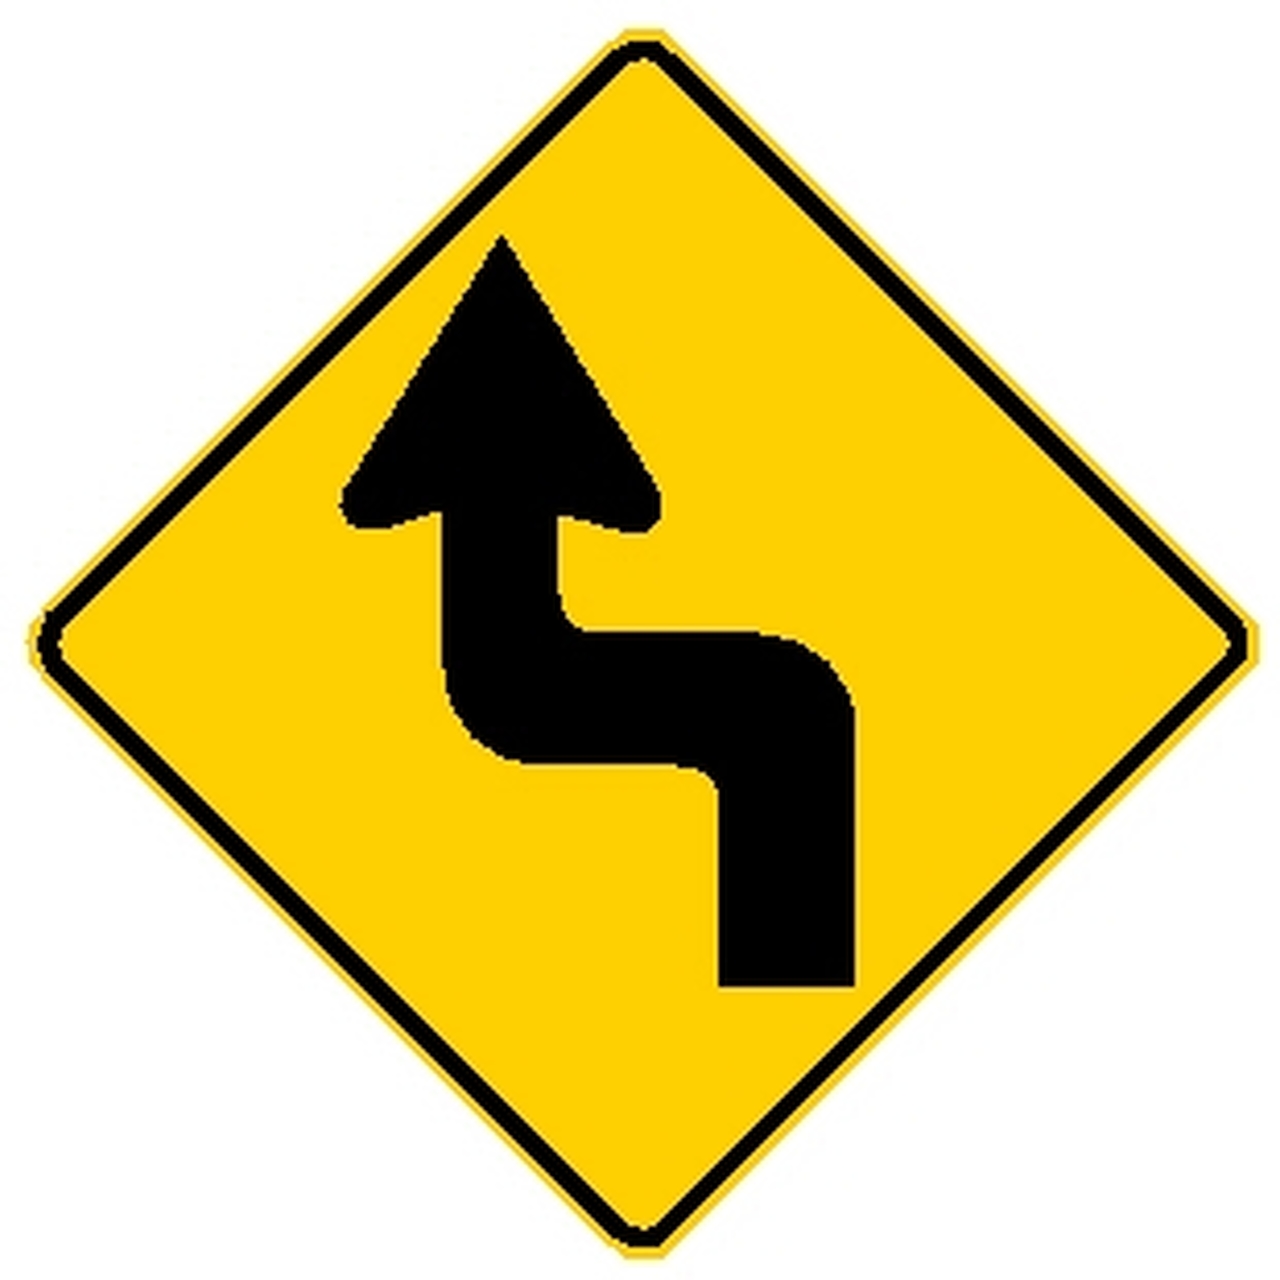 yellow curve ahead sign